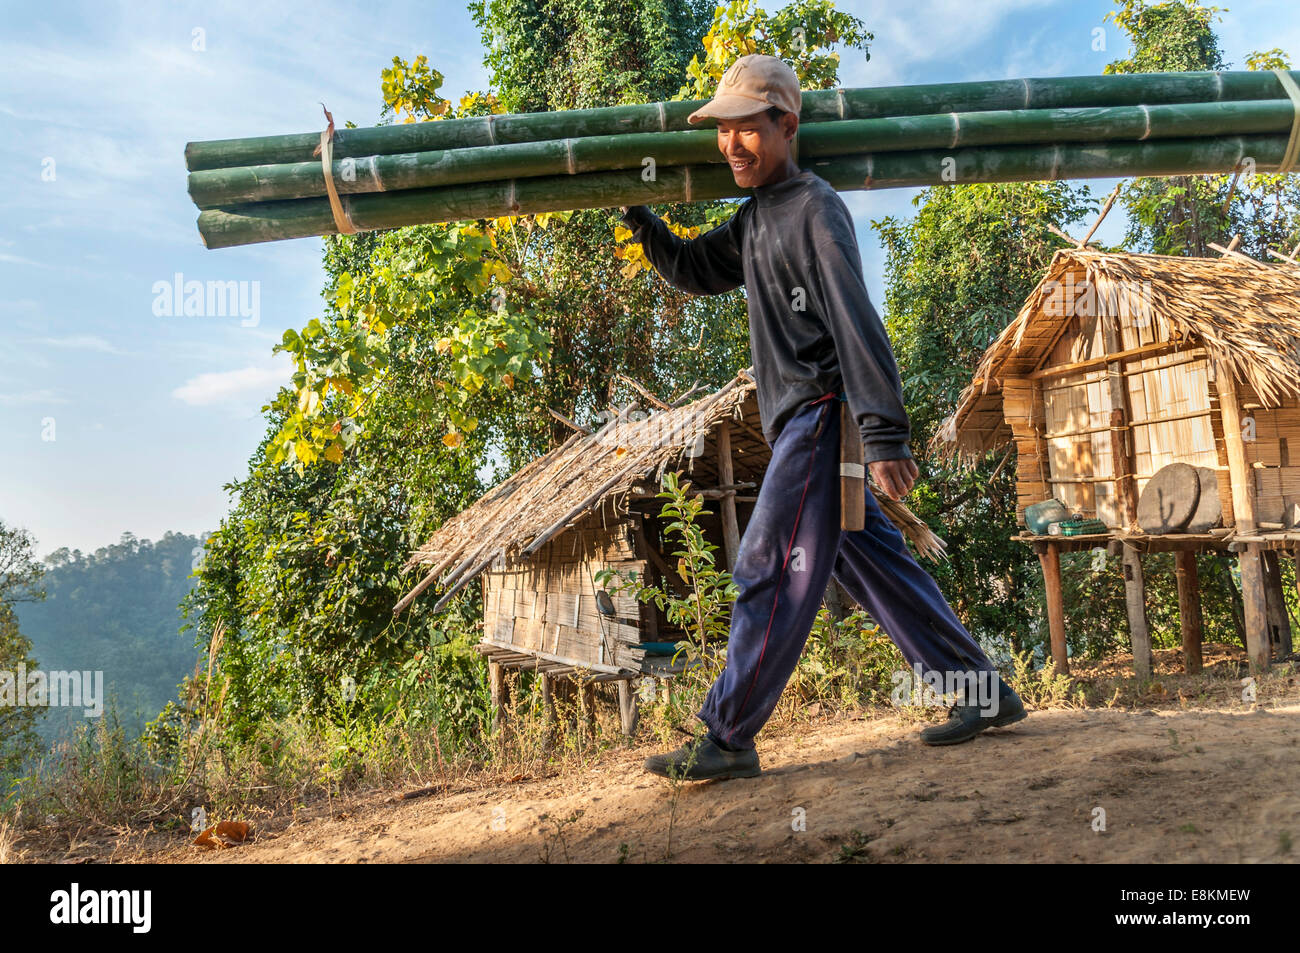 https://c8.alamy.com/comp/E8KMEW/man-from-the-lahu-people-hill-tribe-ethnic-minority-carrying-bamboo-E8KMEW.jpg